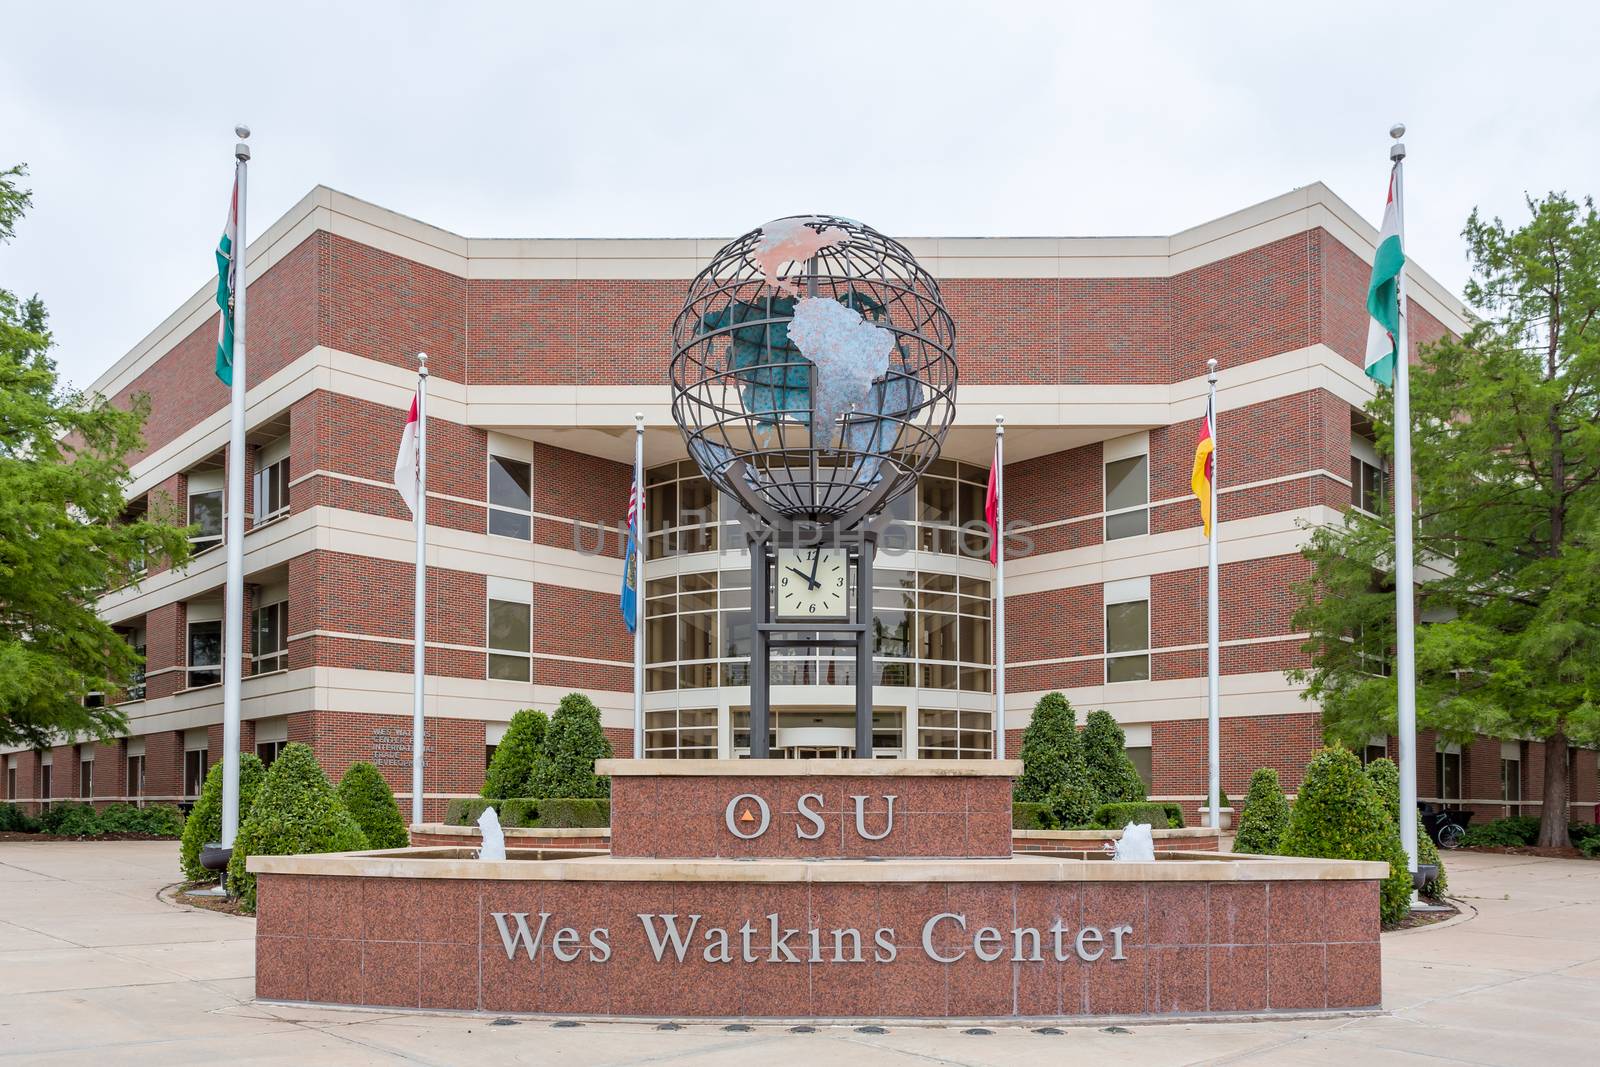 STILLWATER, OK/USA - MAY 20, 2016: Wes Watkins Center on the campus of Oklahoma State University.